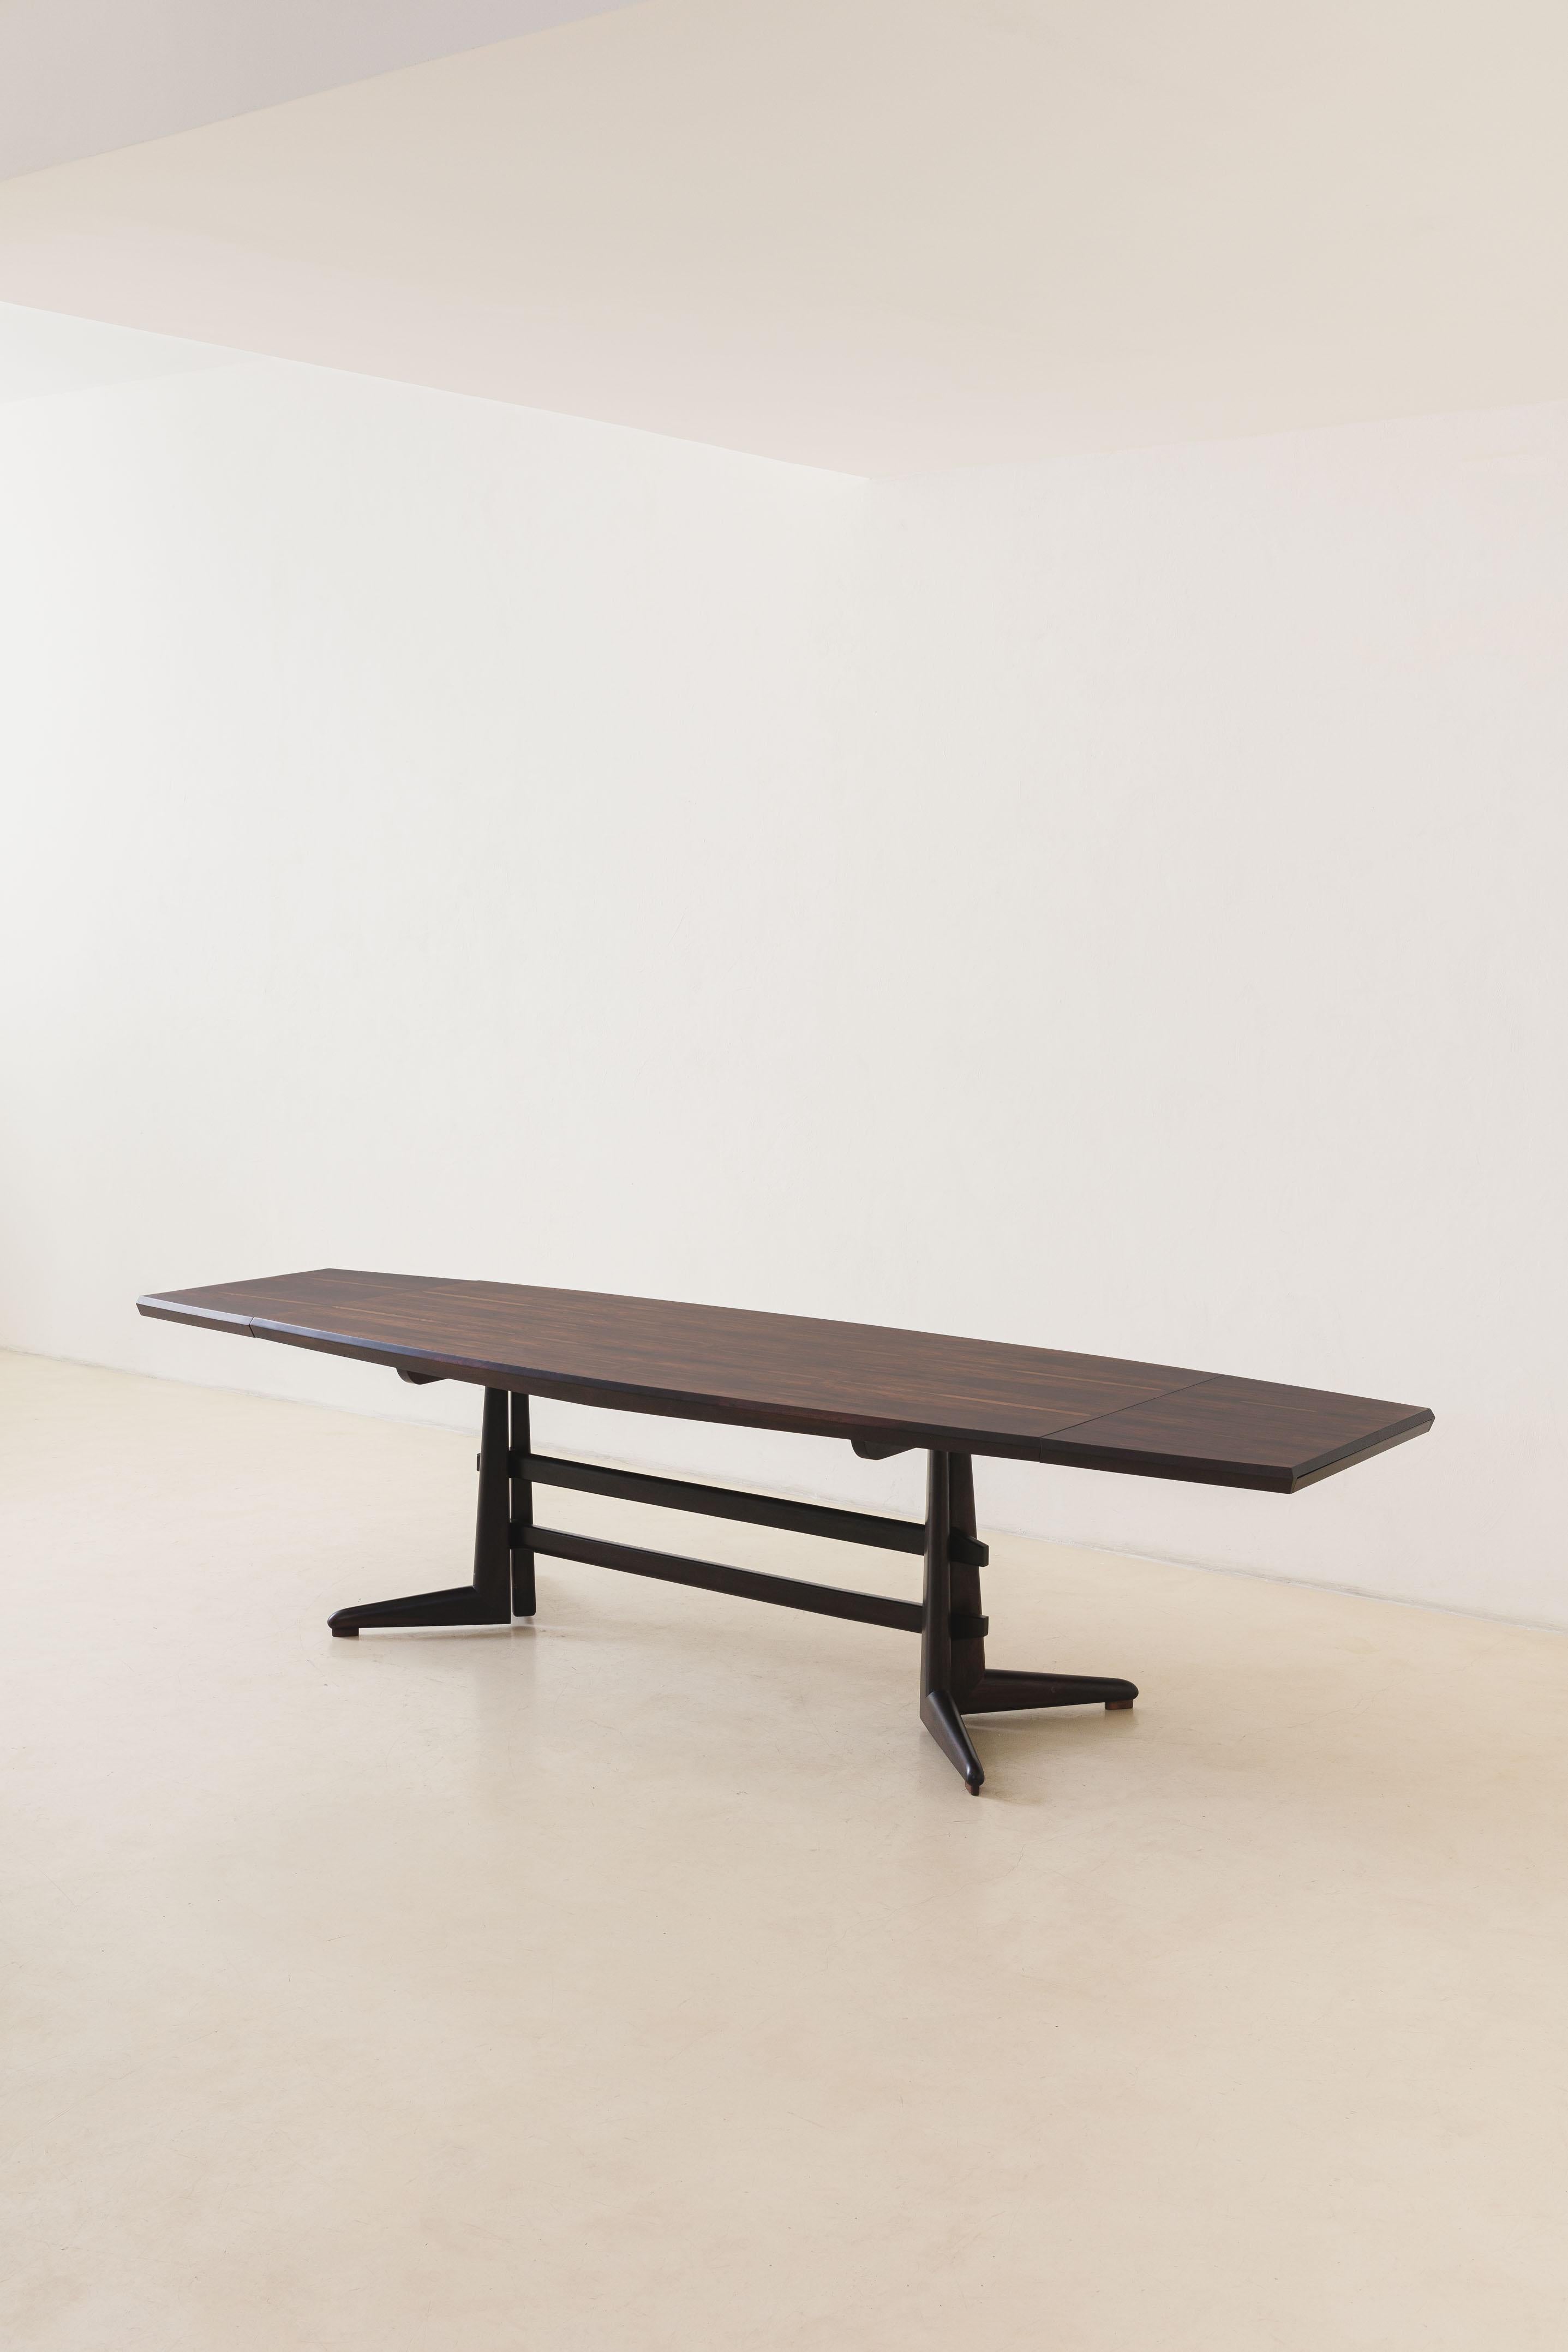 This fantastic dining table was designed in the 1960s by Jean Gillon (1919-2007), a Romanian-born architect, artist, and designer who landed in Brazil in 1956. The piece has a solid Rosewood structure, with a veneered top and extensions that